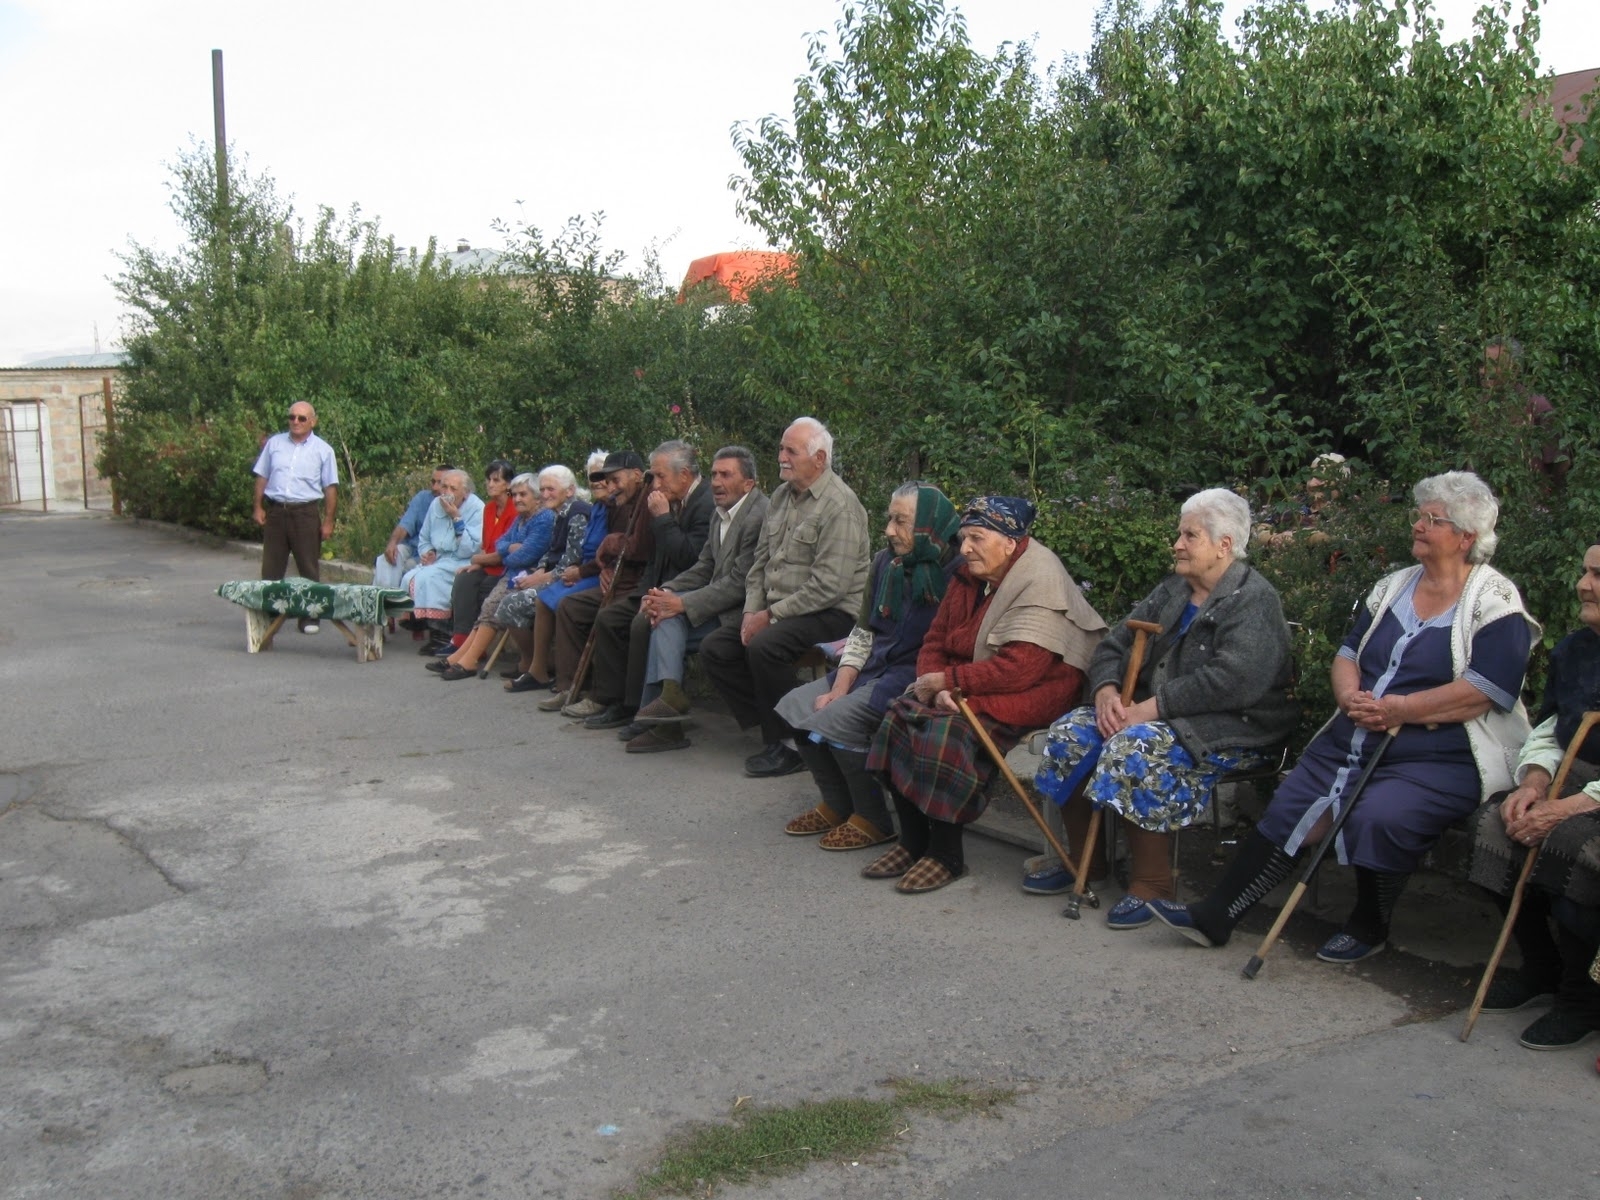 1240 elderly people living in Armenia's eight nursing homes: parent-loving society or retreat 
of traditions?